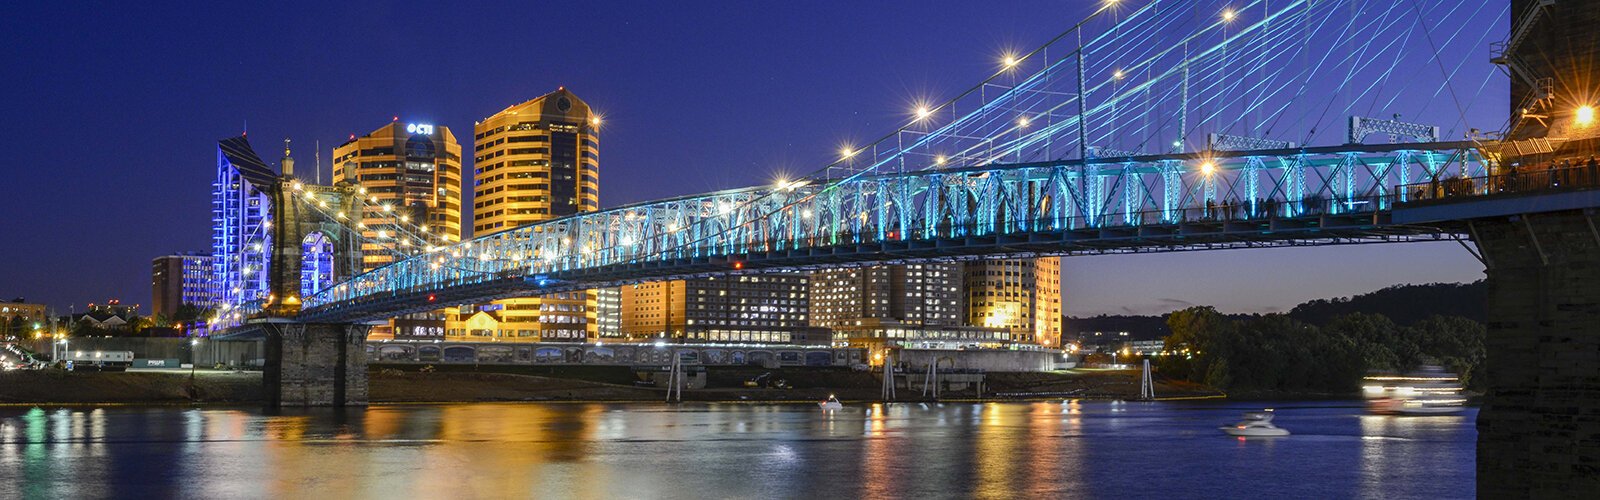 The John A. Roebling Bridge is a symbol of the Greater Cincinnati and Northern Kentucky region.